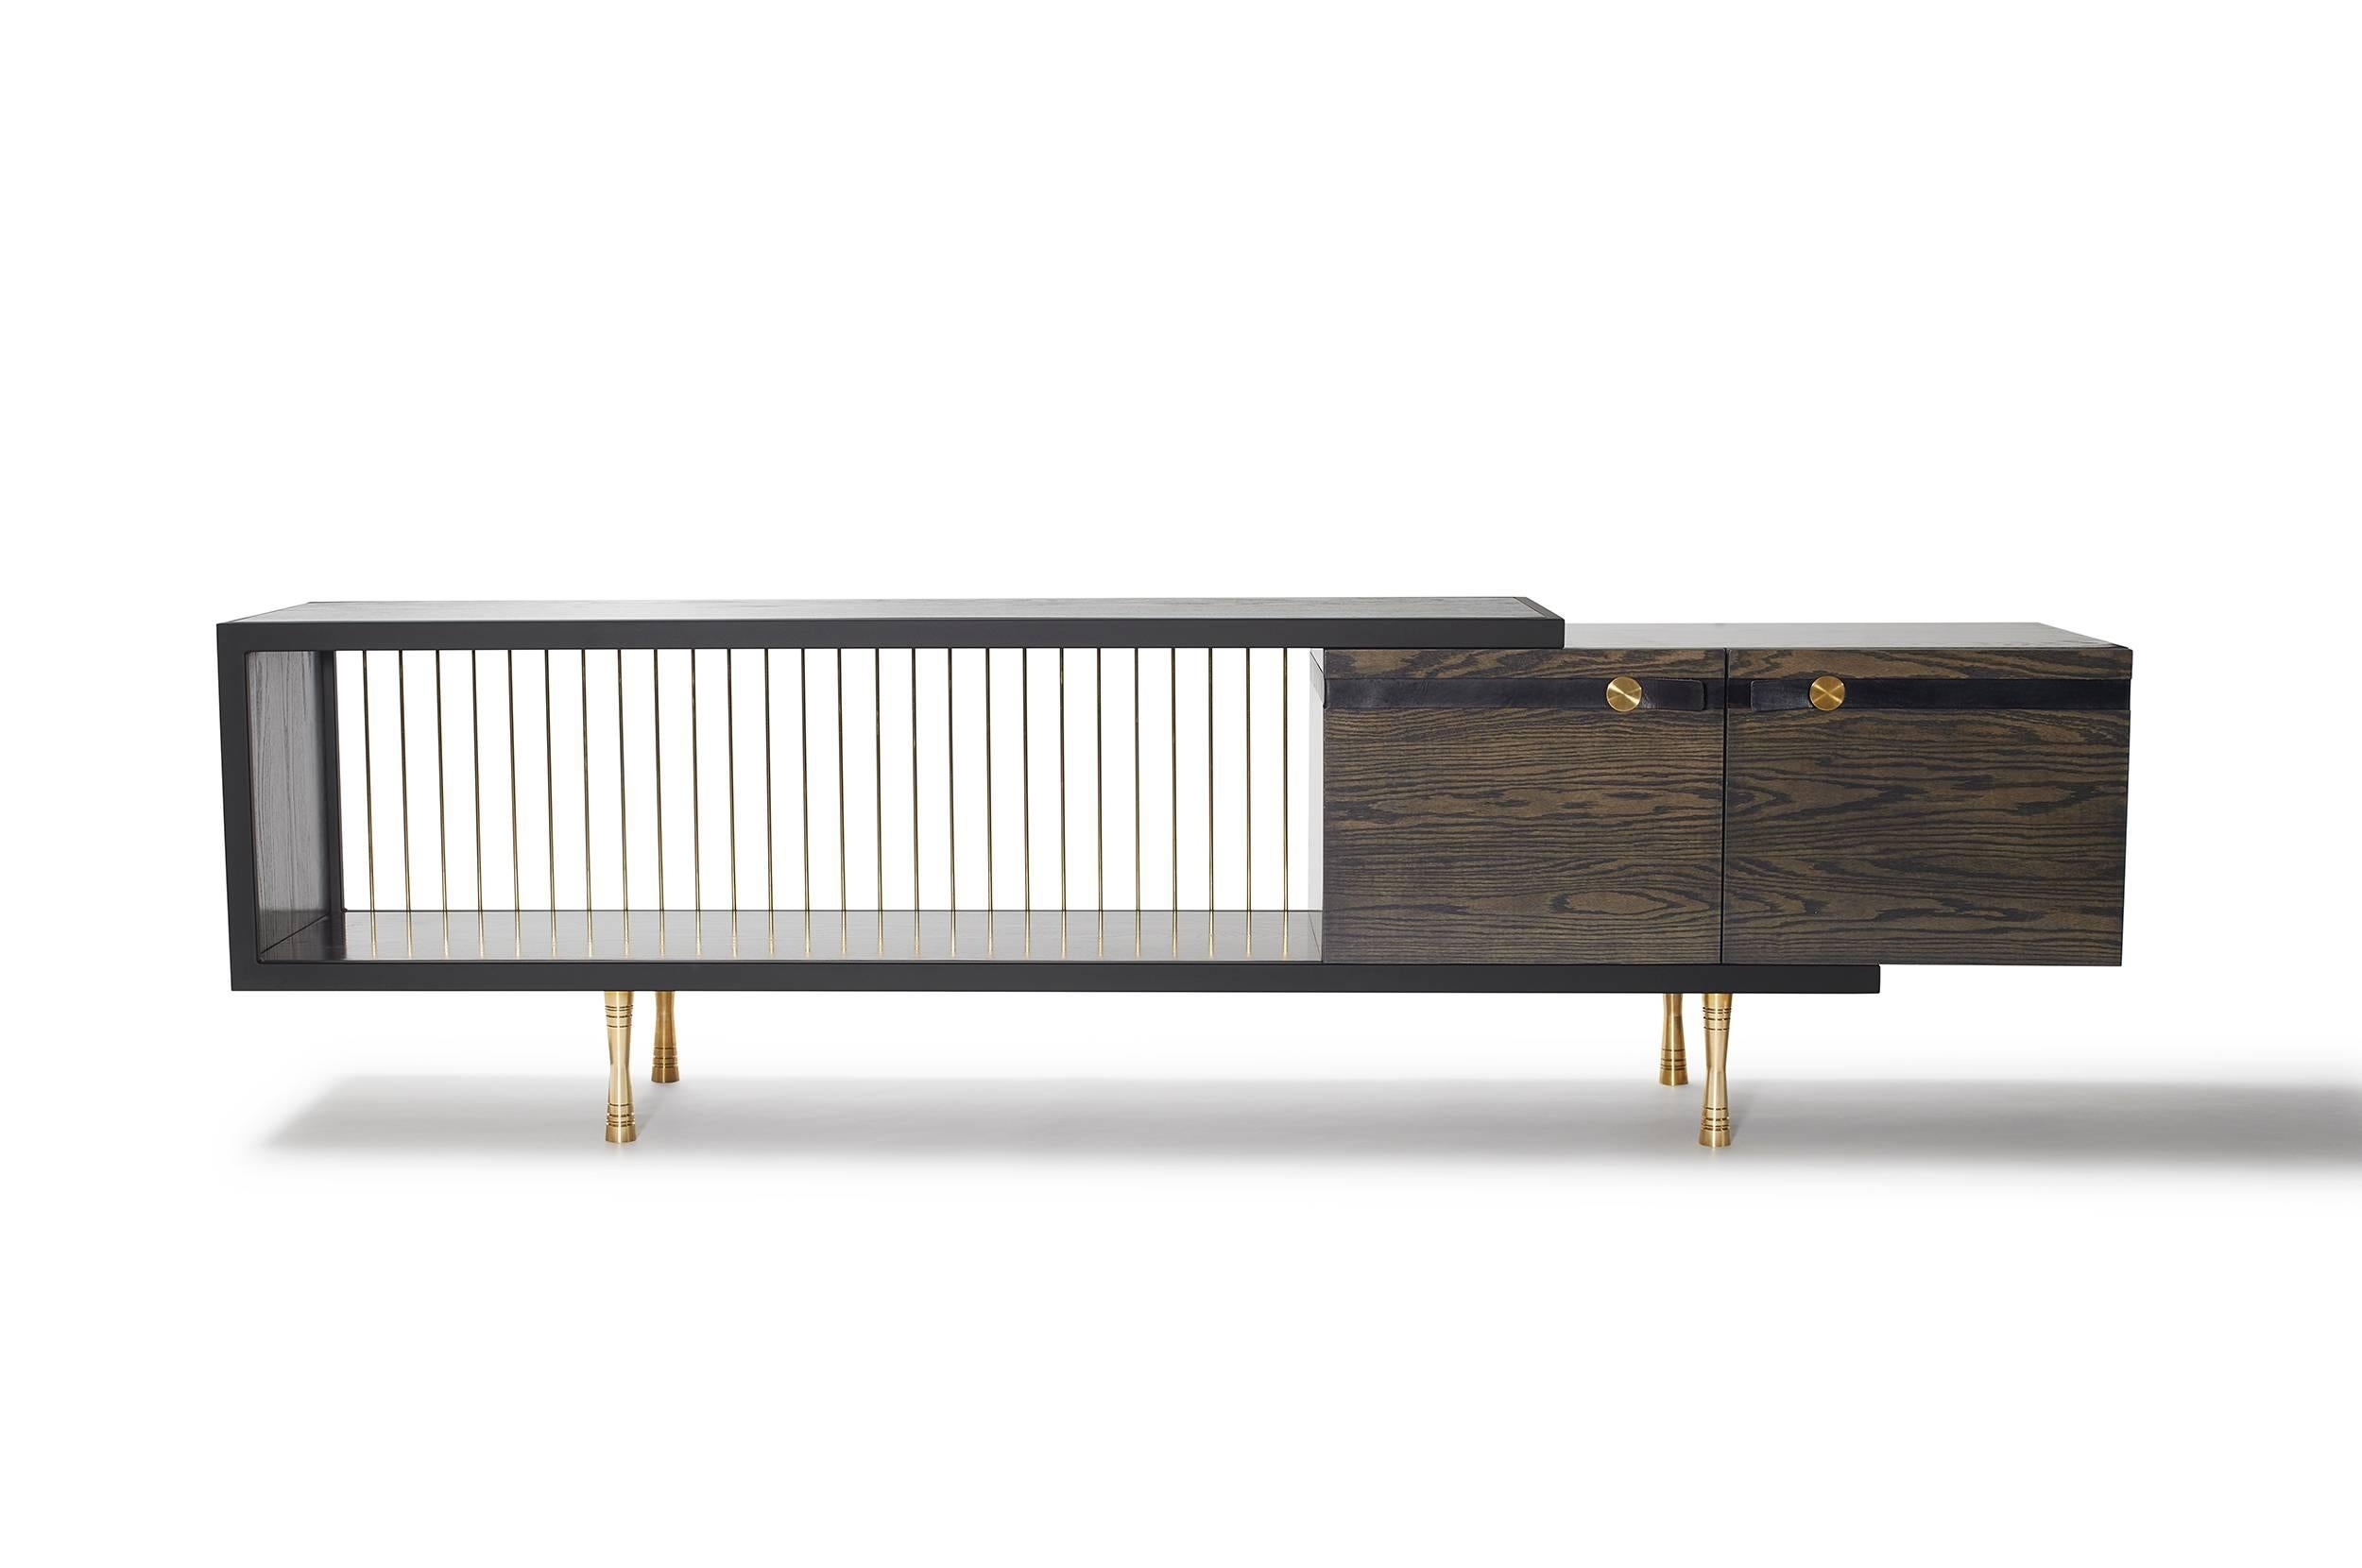 The Viga console features a handcrafted matte black powder-coated steel frame along with hand-dyed leather accents, dark grey stained red oak cabinetry and delicate brass rods lining the exposed back edge. Use as a credenza, bookshelf, media cabinet